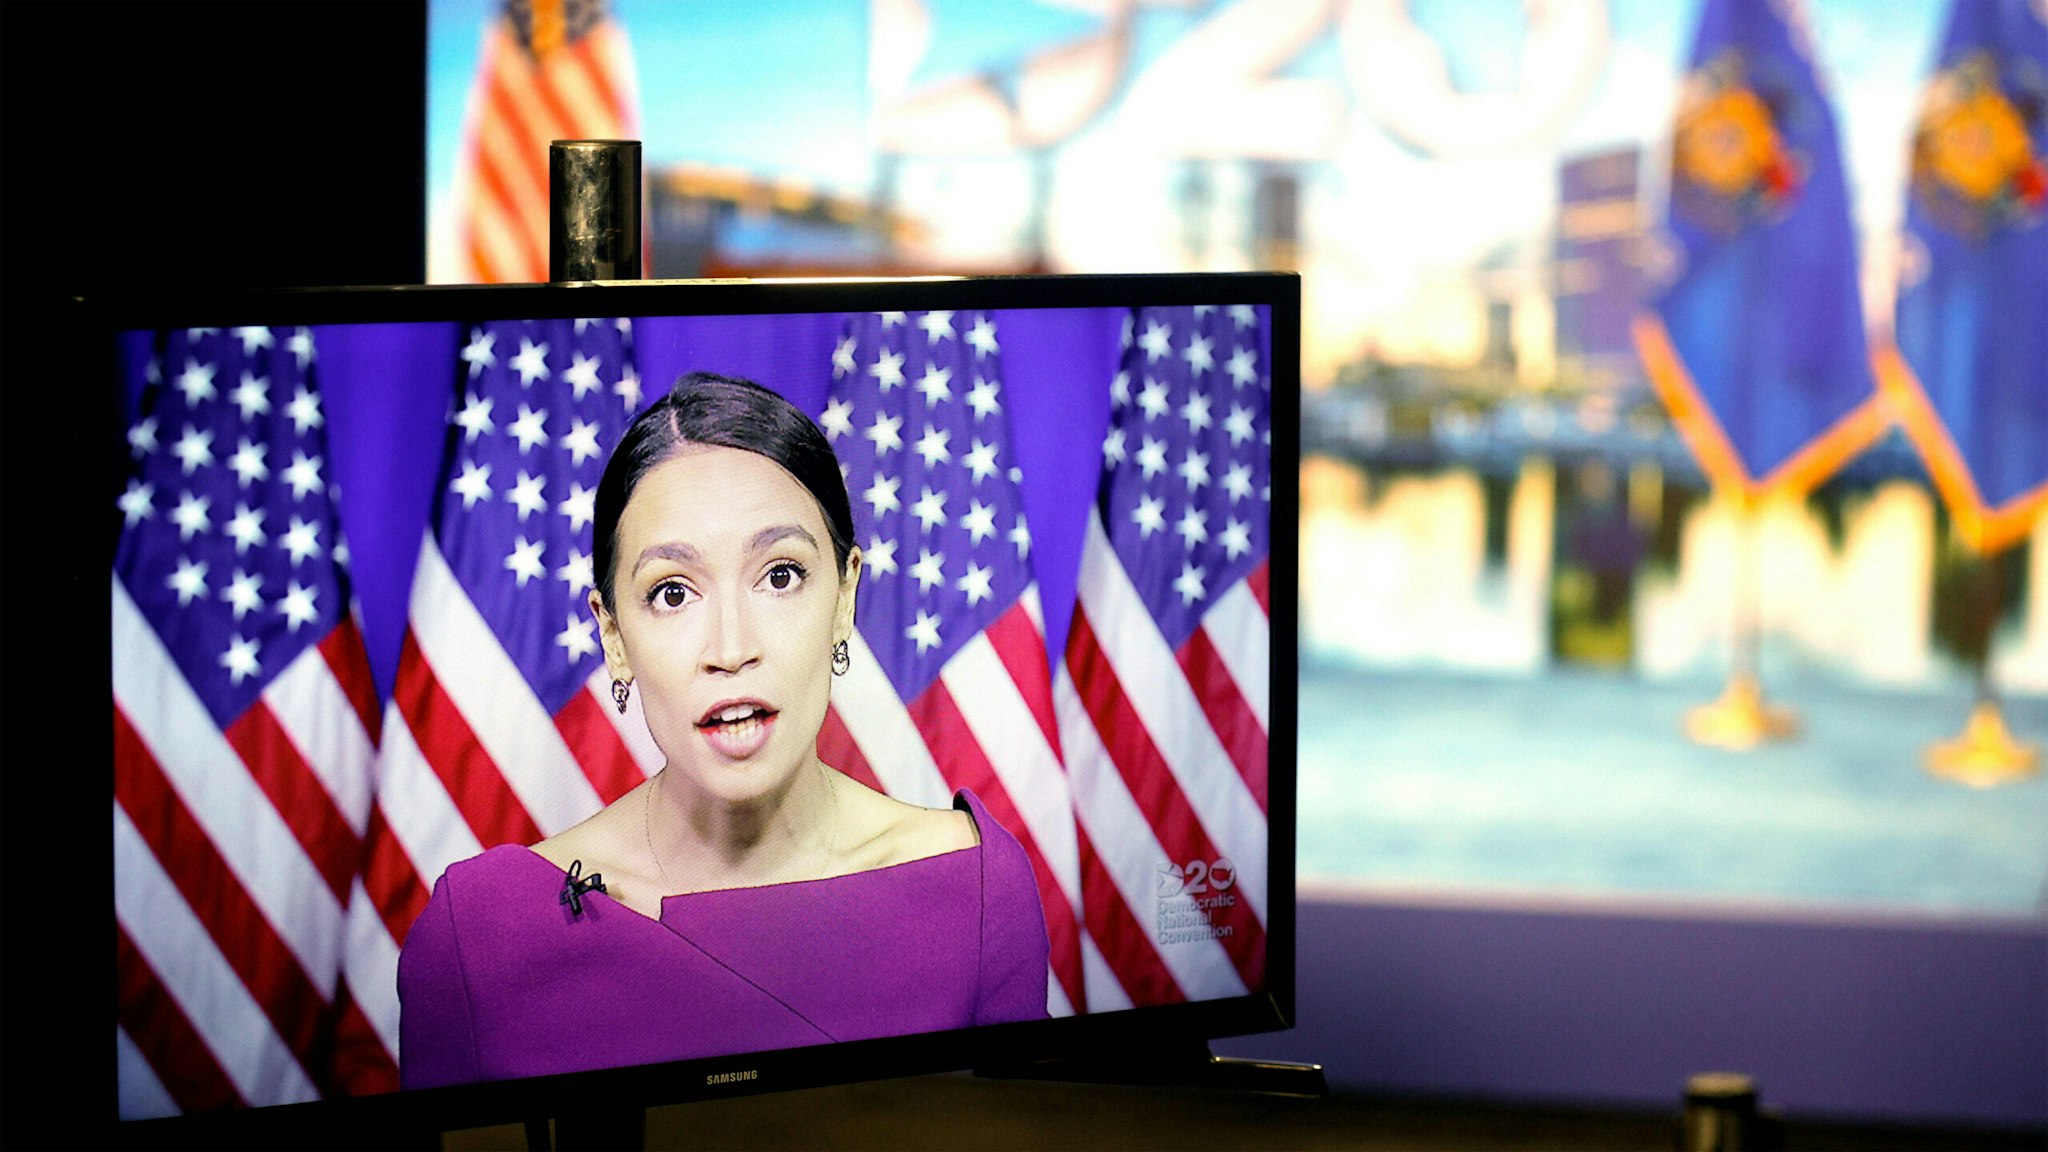 US Rep. Alexandria Ocasio-Cortez (D-NY) seconds the nomination of US Senator Bernie Sanders via video feed during the second day of the Democratic National Convention, being held virtually amid the novel coronavirus pandemic, at its hosting site in Milwaukee, Wisconsin, on August 18, 2020.